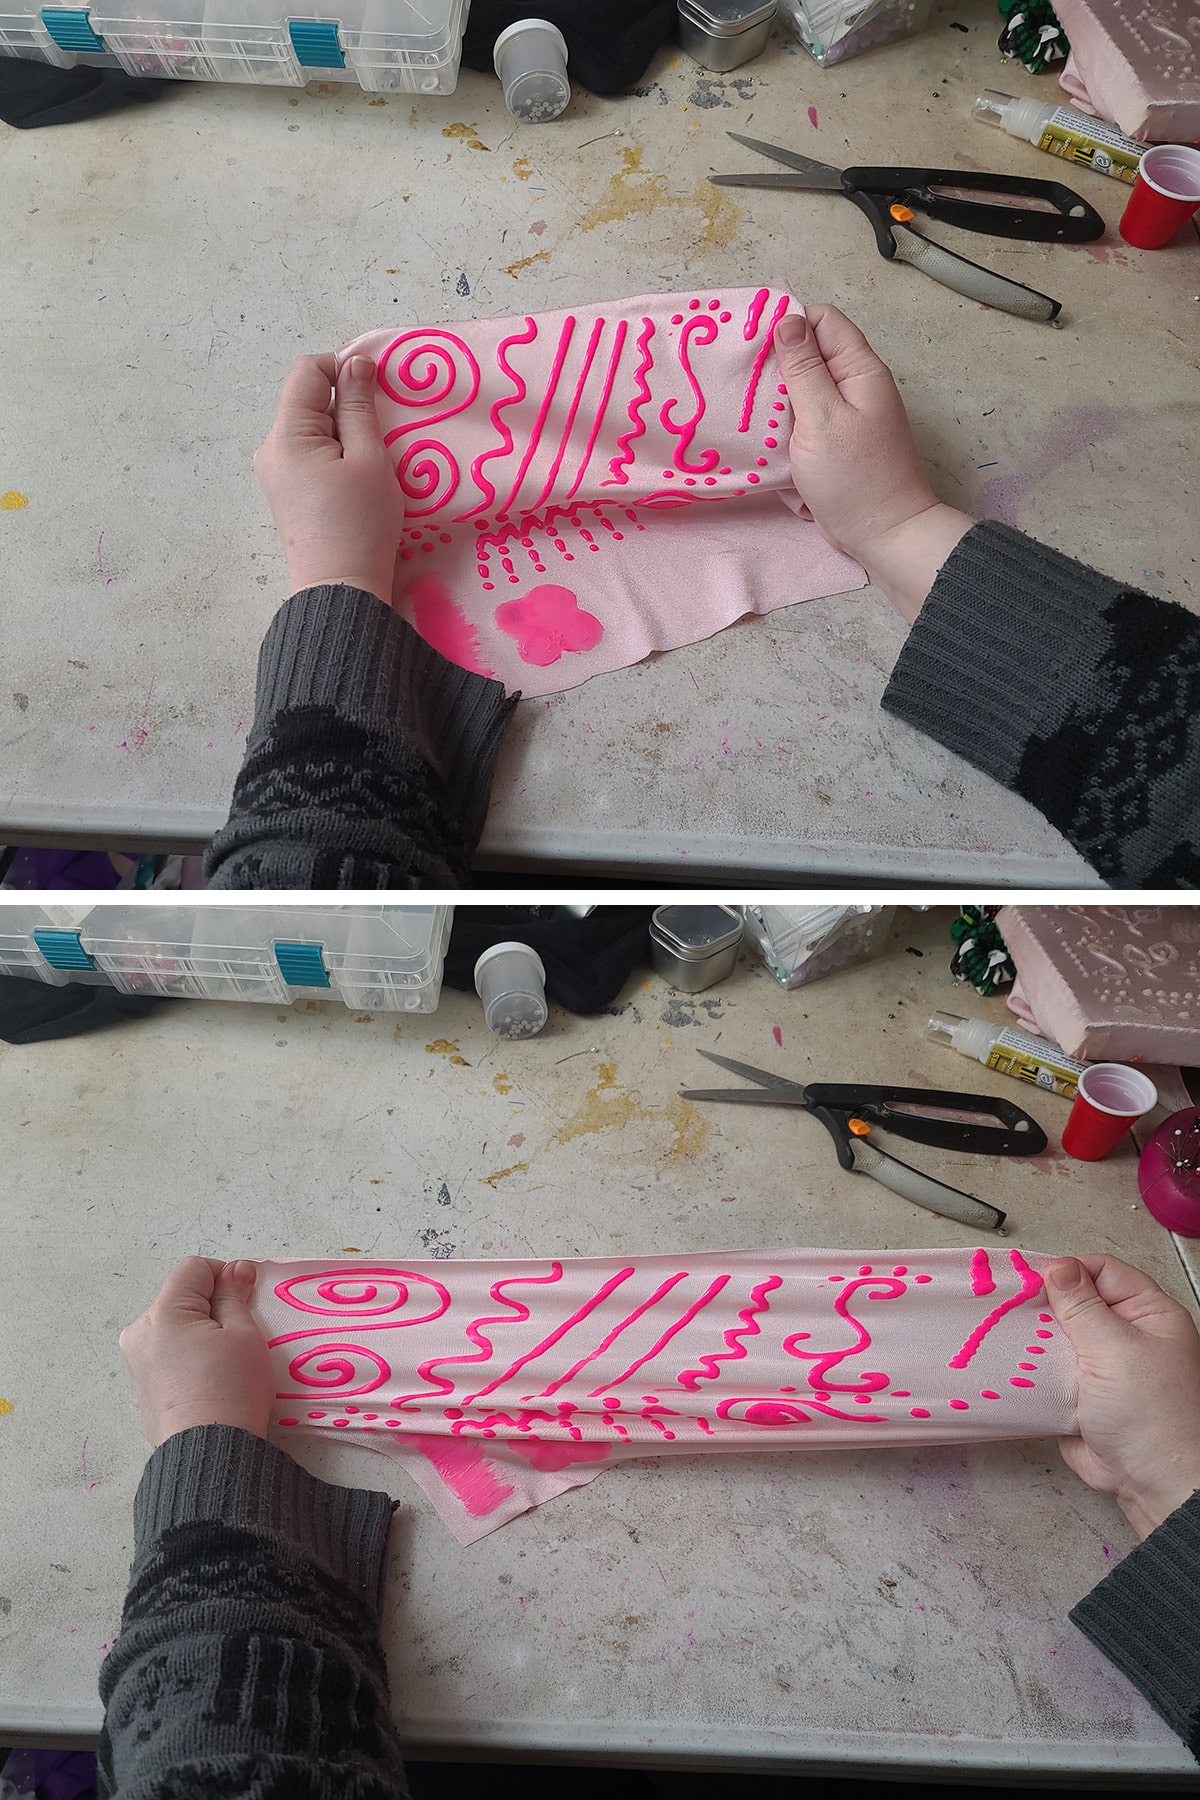 A two-part compilation image showing two hands holding a piece of light pink spandex with neon pink stretch paint swirls on it. The top image shows it relaxed, the second image shows the fabric being stretched to its limit.